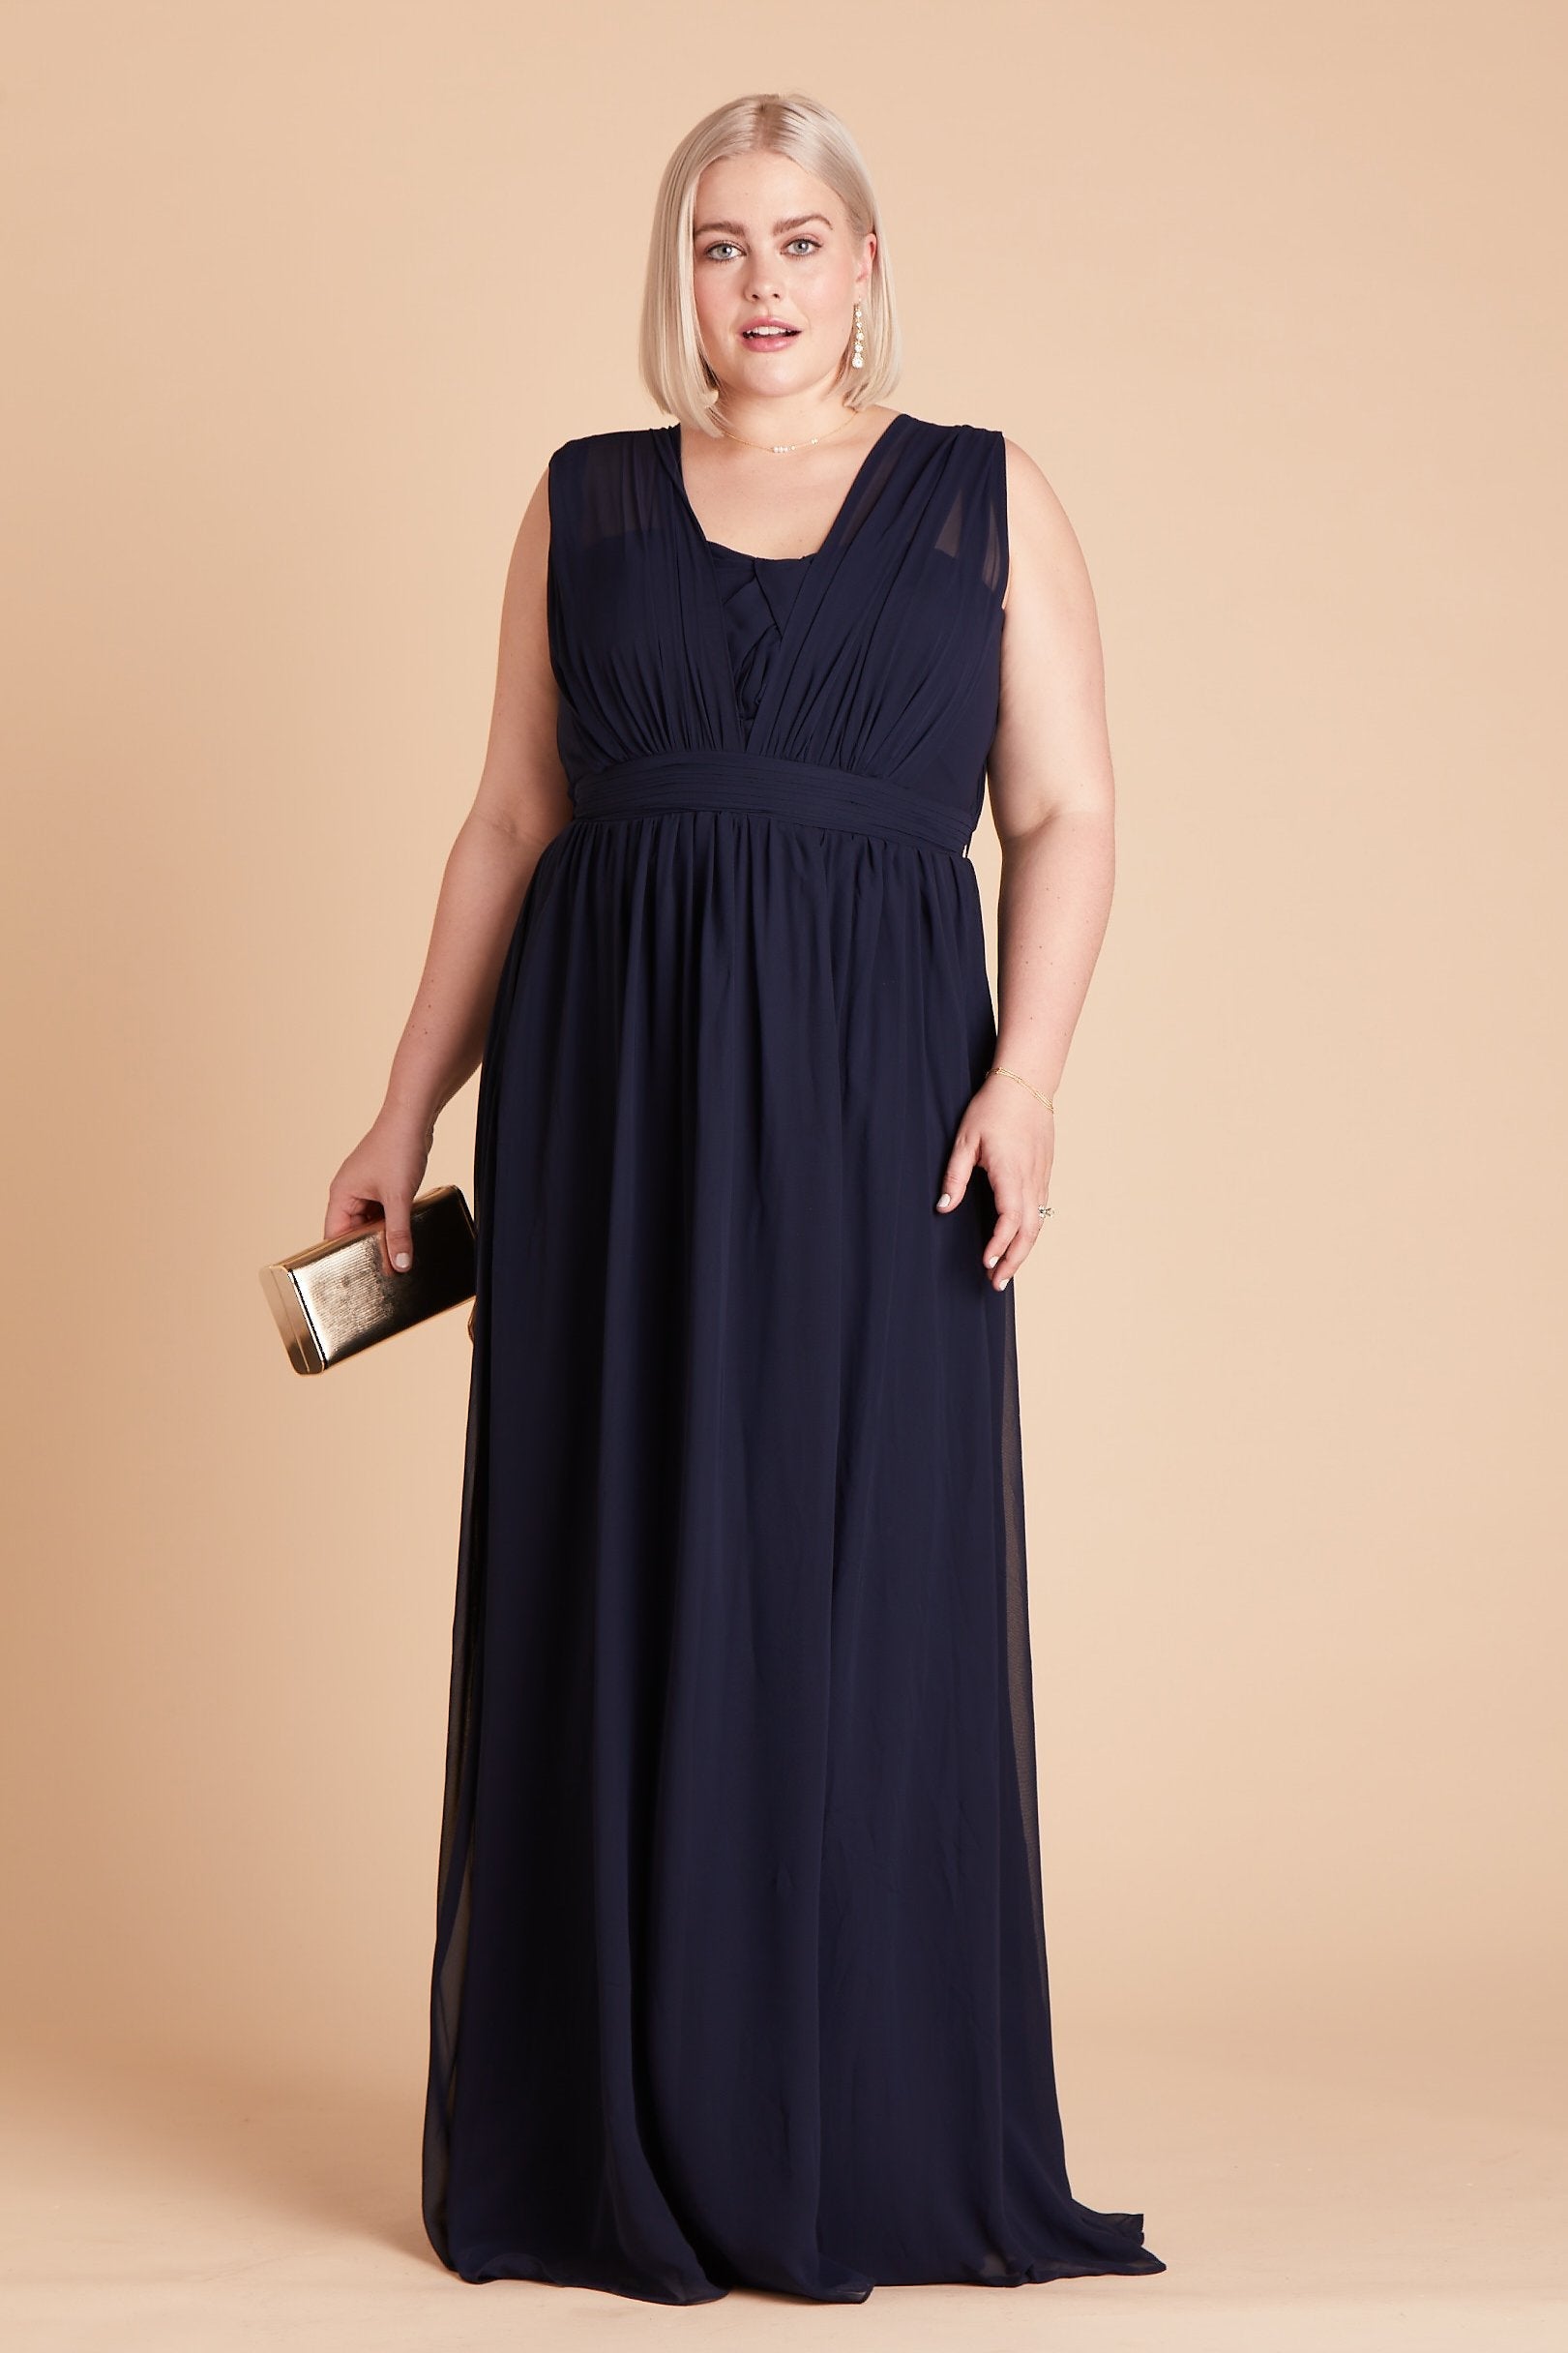 Grace convertible plus size bridesmaid dress in navy blue chiffon by Birdy Grey, front view